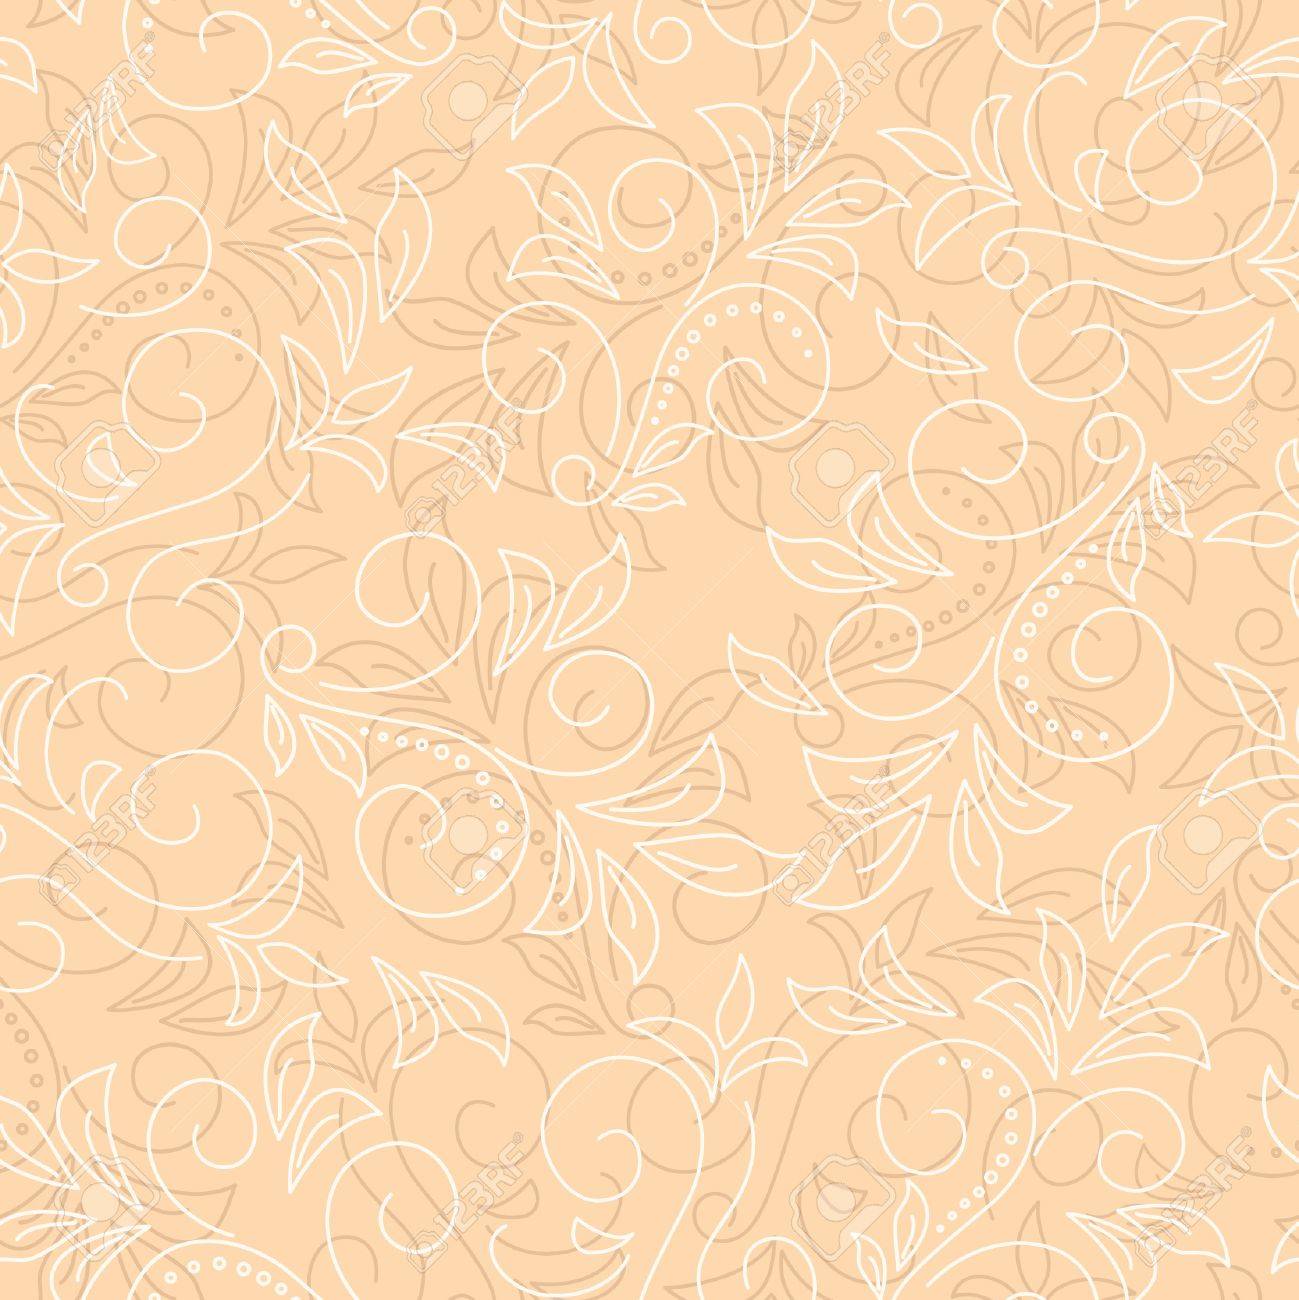 Light Beige Seamless Floral Background Vector Royalty